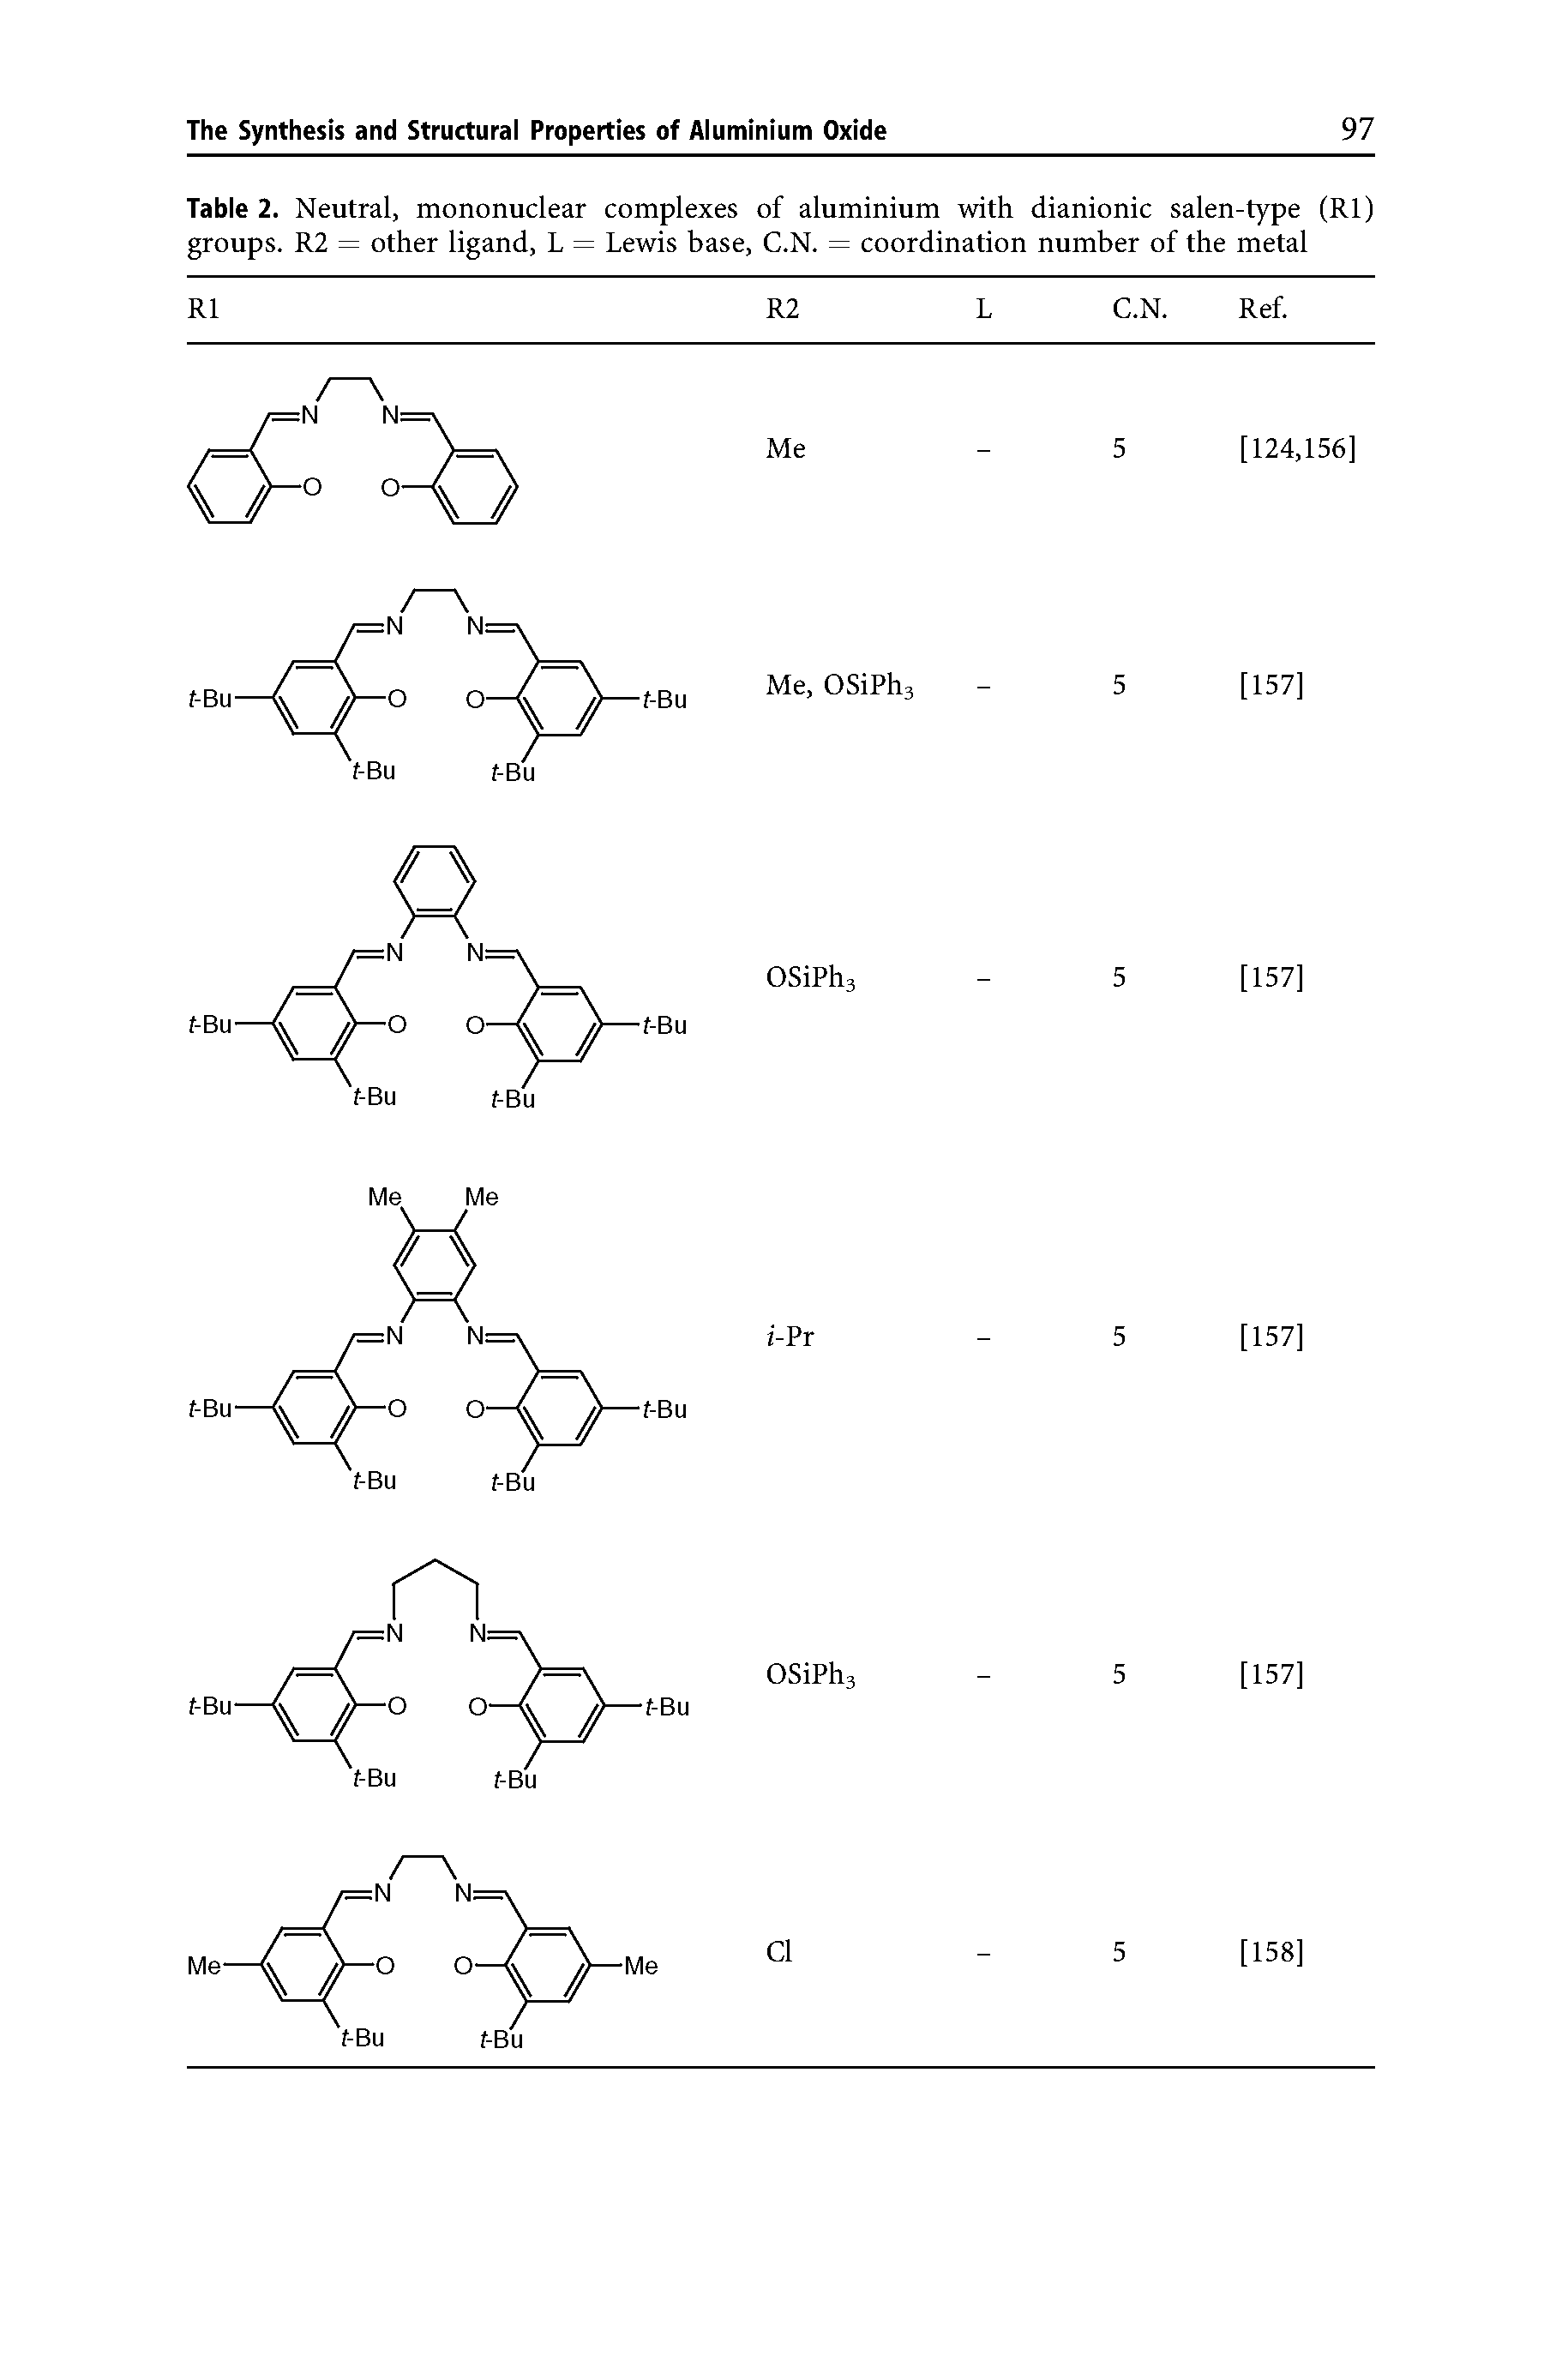 Table 2. Neutral, mononuclear complexes of aluminium with dianionic salen-type (Rl) groups. R2 = other ligand, L = Lewis base, C.N. = coordination number of the metal...